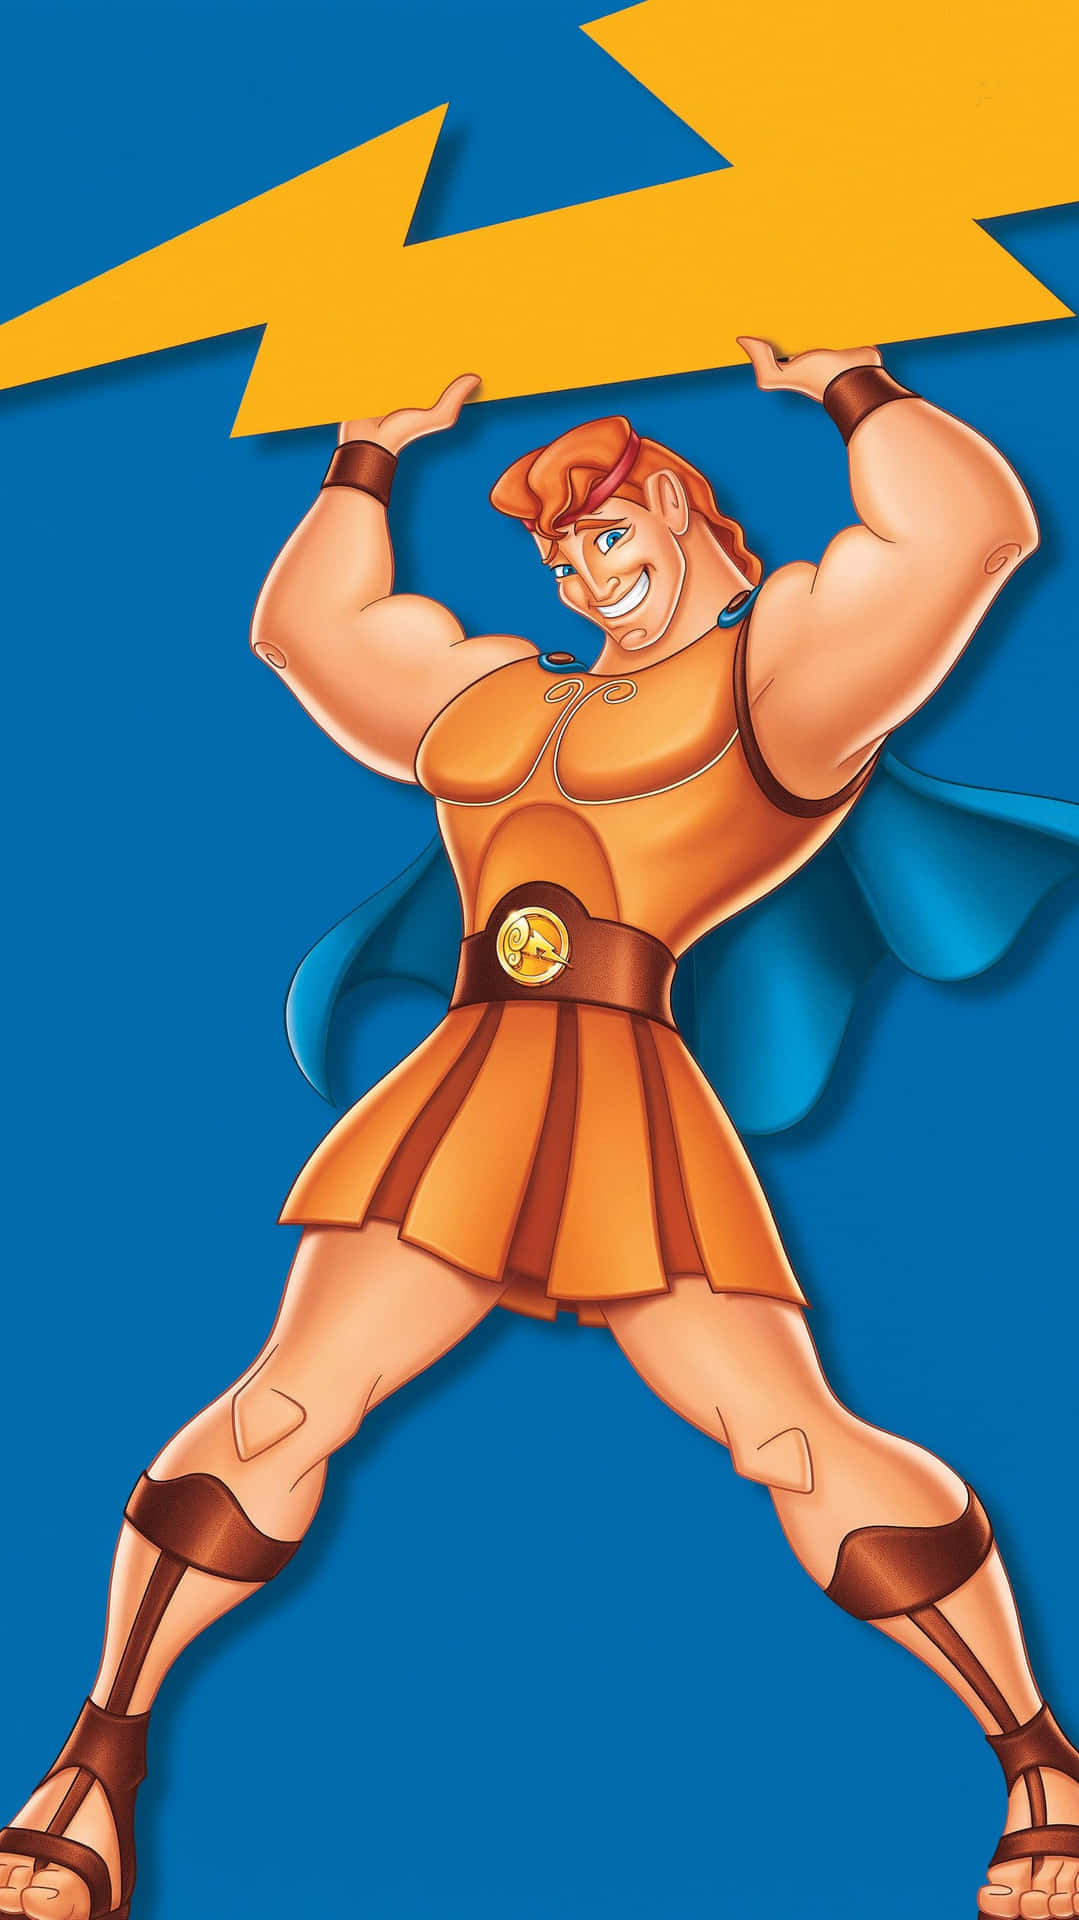 Hercules Stands Victorious with His Pyrmidths